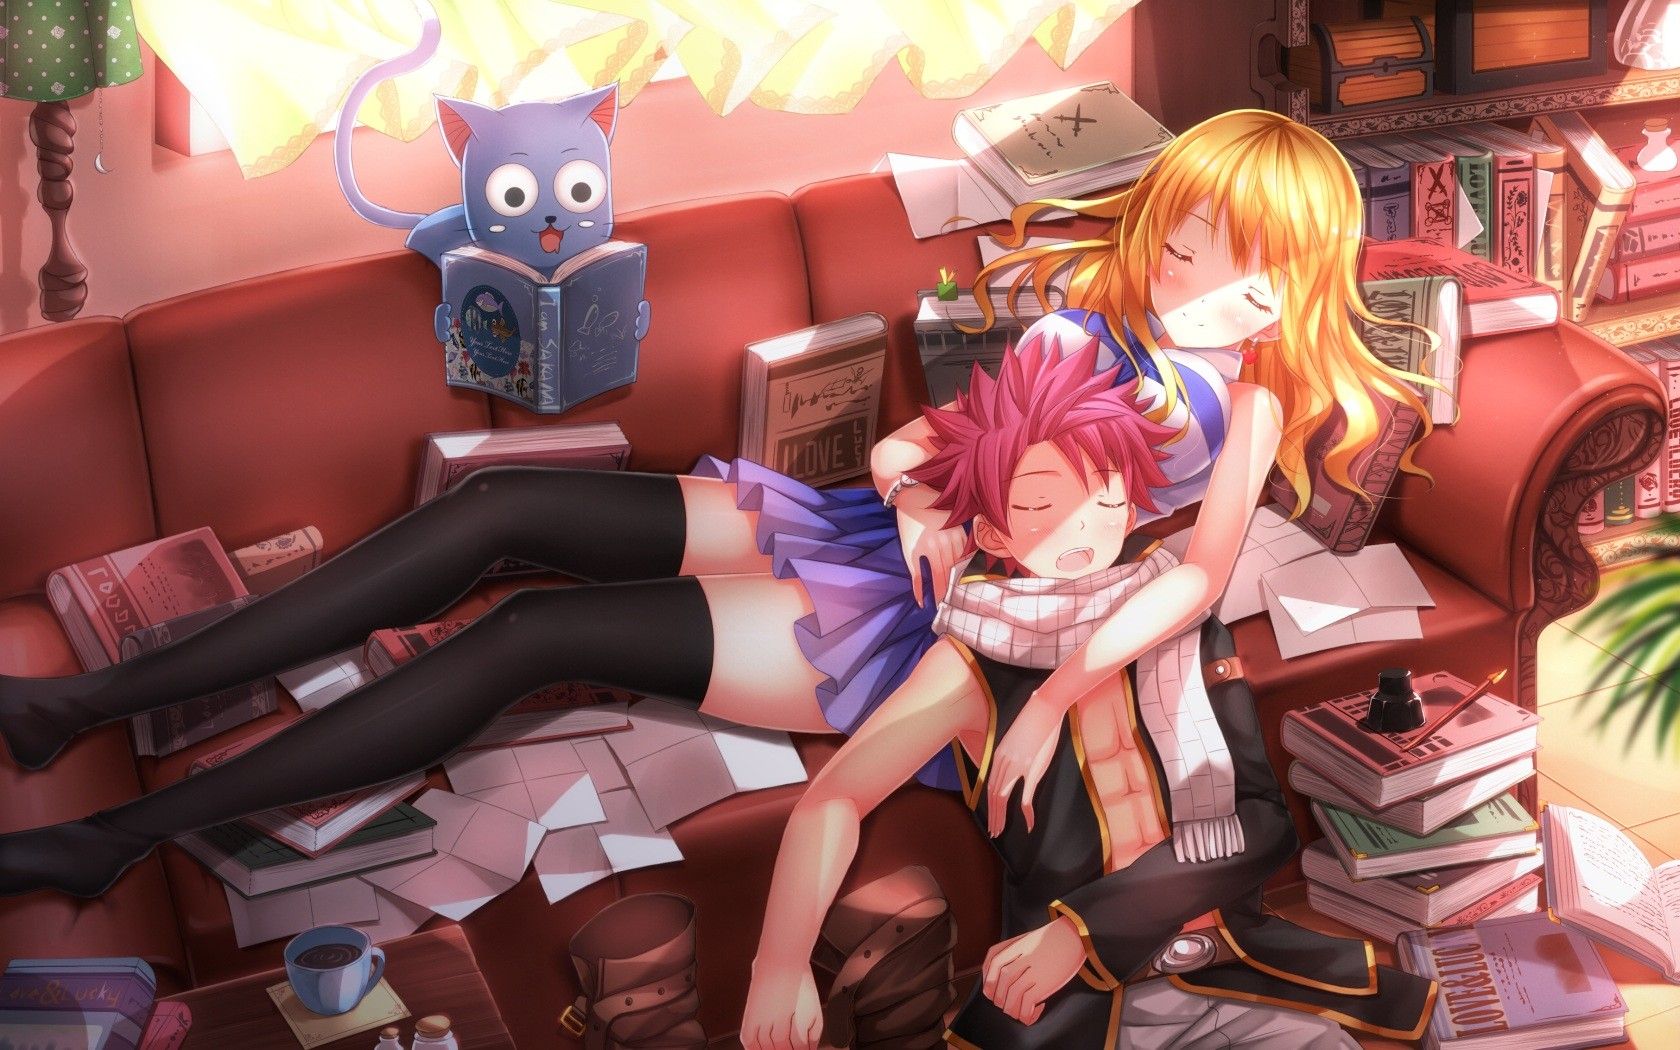 blondes, skirts, books, pink hair, Fairy Tail, thigh highs